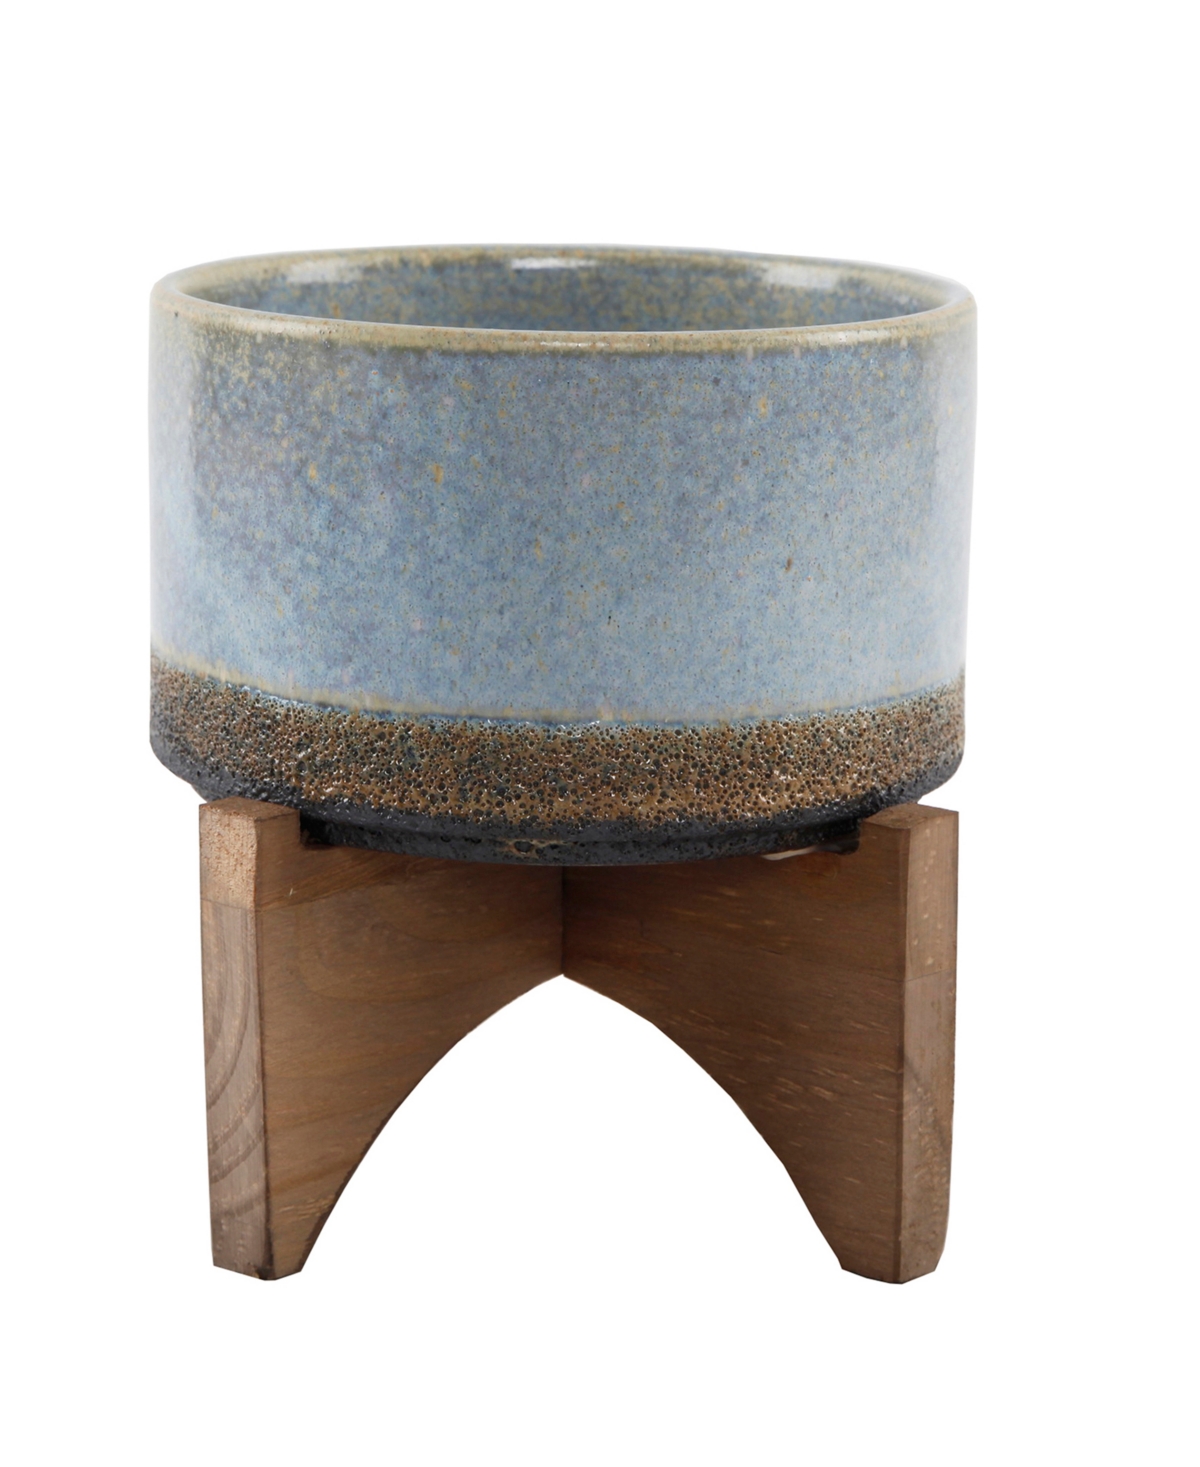 Opening Lava Ceramic Planter on Wood Stand, 6.25" - Blue